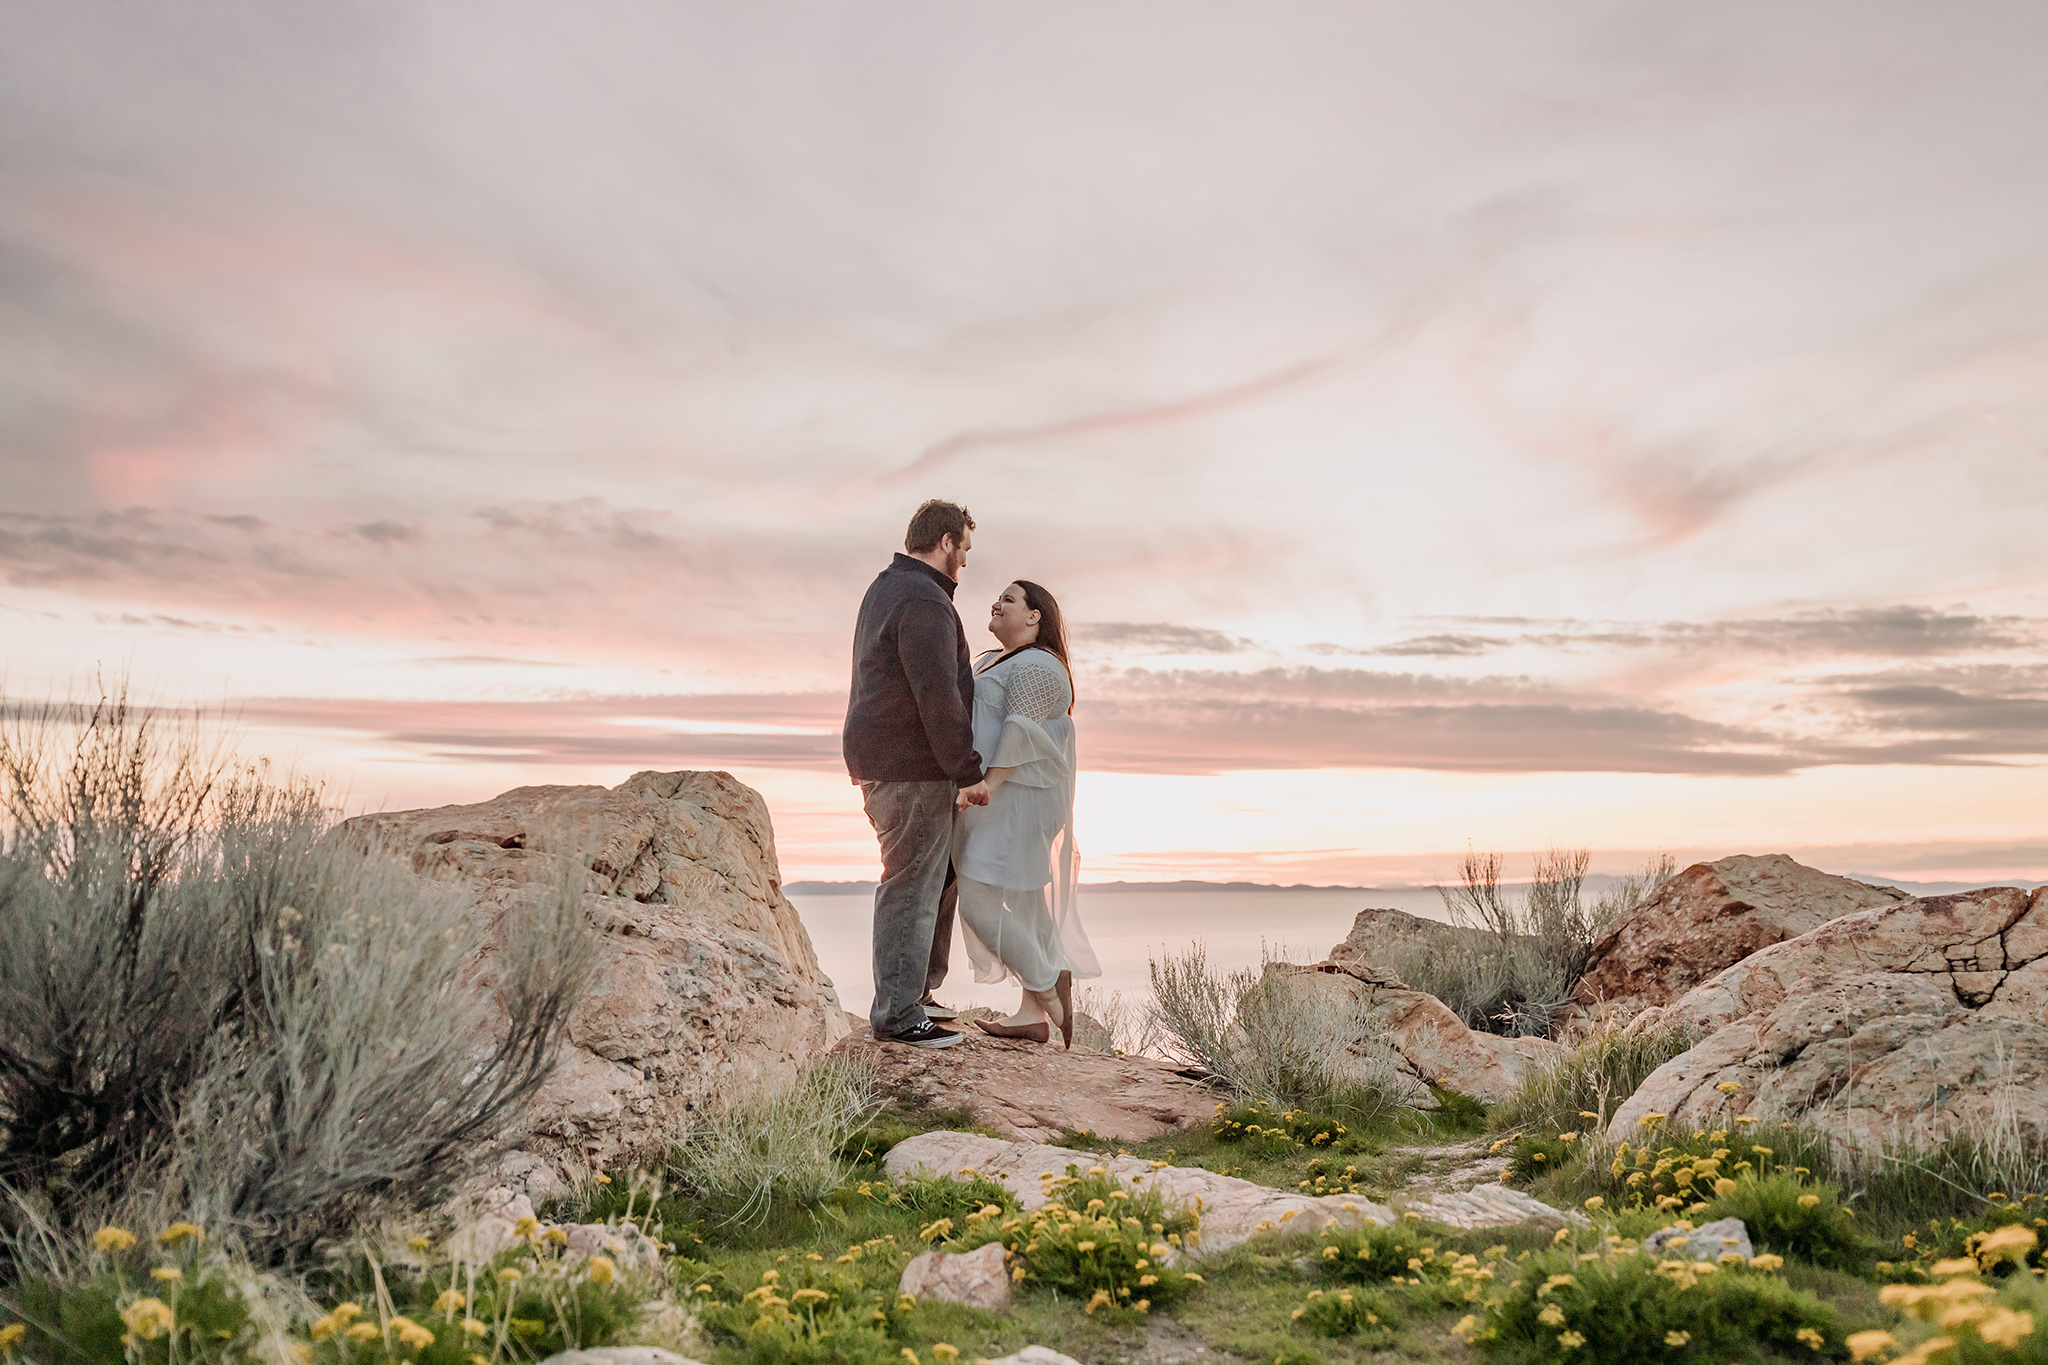 Breathtaking Buffalo Point Utah couples portraits in Spring. Exploring Utah with ENV Photography. Sunset over Great Salt Lake.